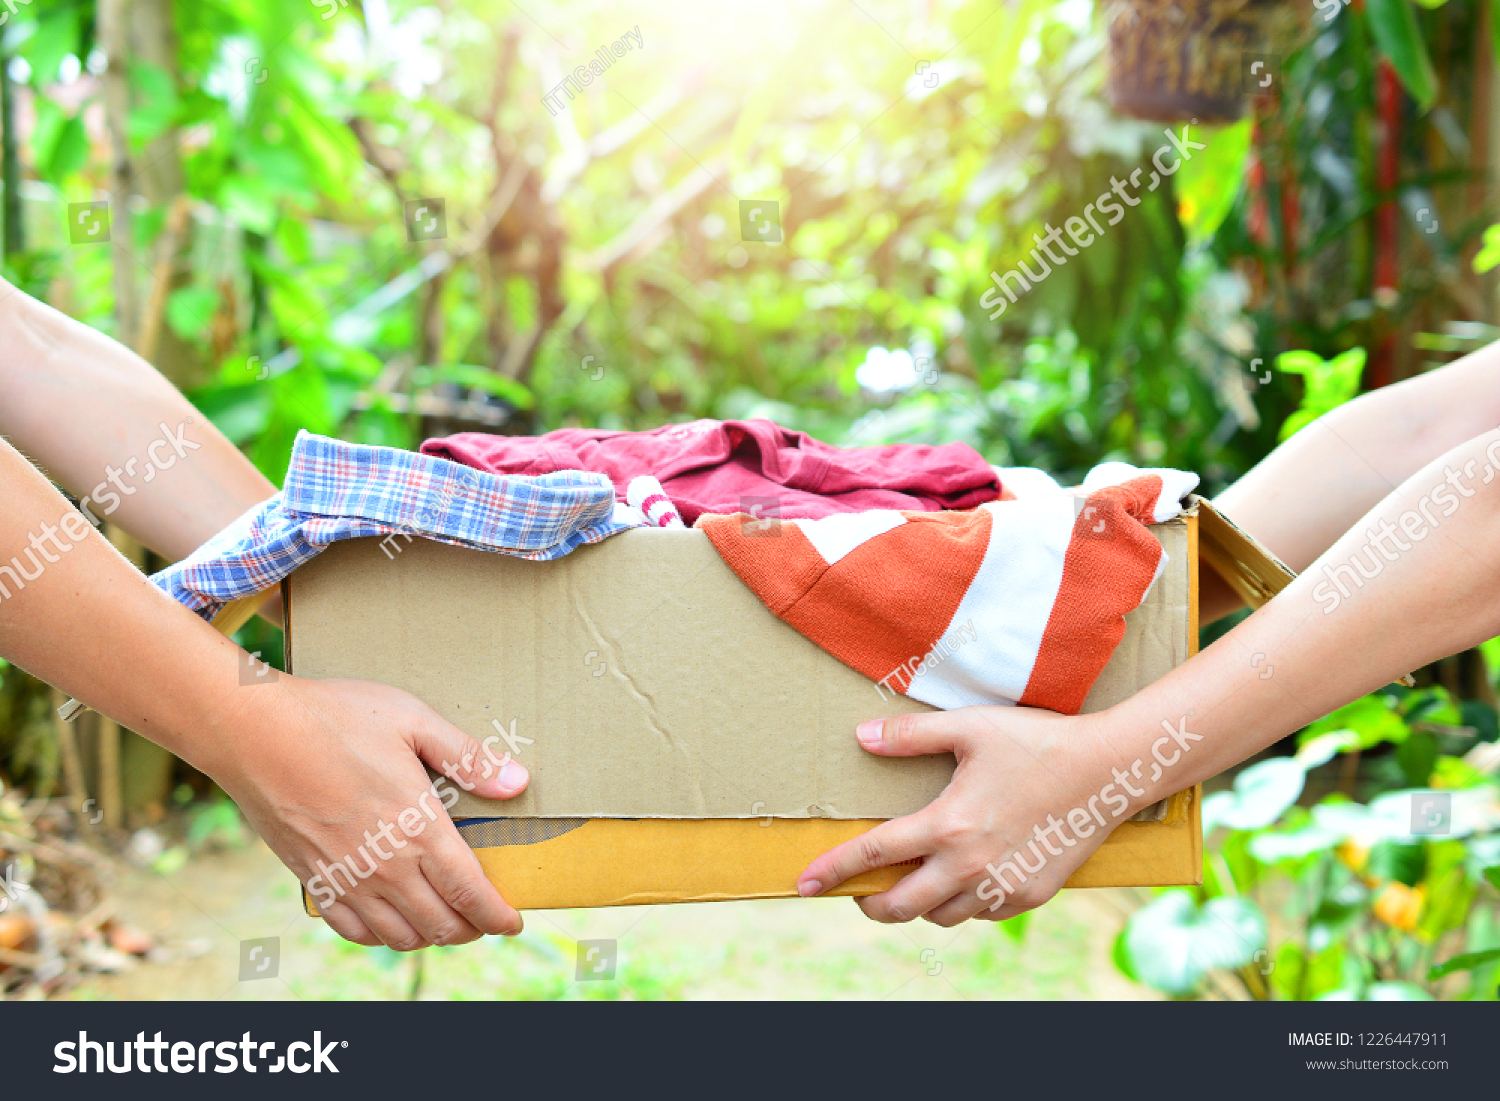 hand holding box give clothes together for concept donation and reuse recycle #1226447911